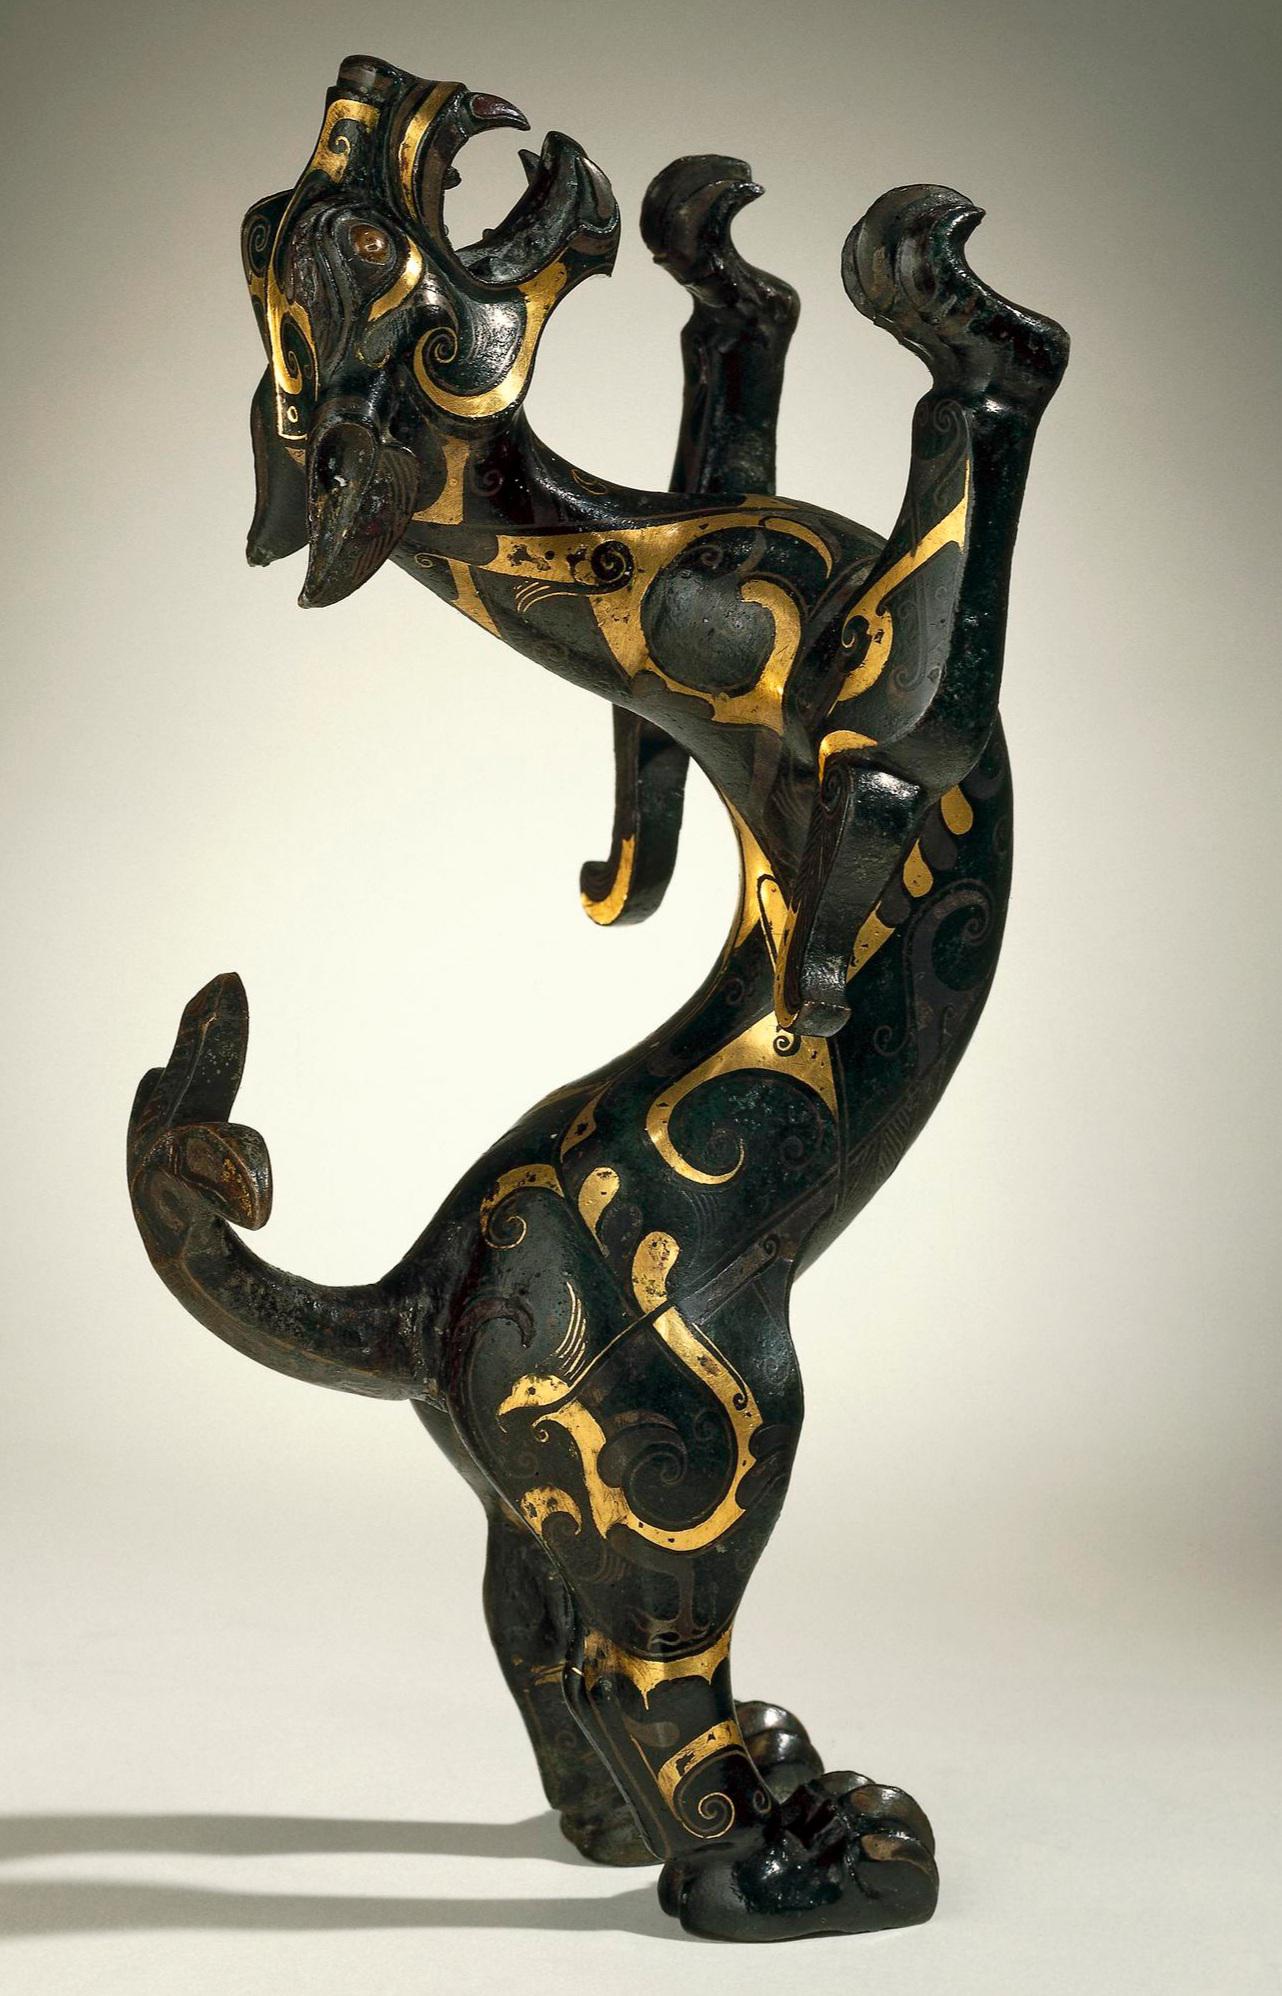 A bronze figure of a leaping feline, inlaid in gold and silver. From China, Eastern Zhou dynasty, 4th-3rd century BCE, now housed at the British Museum.jpg